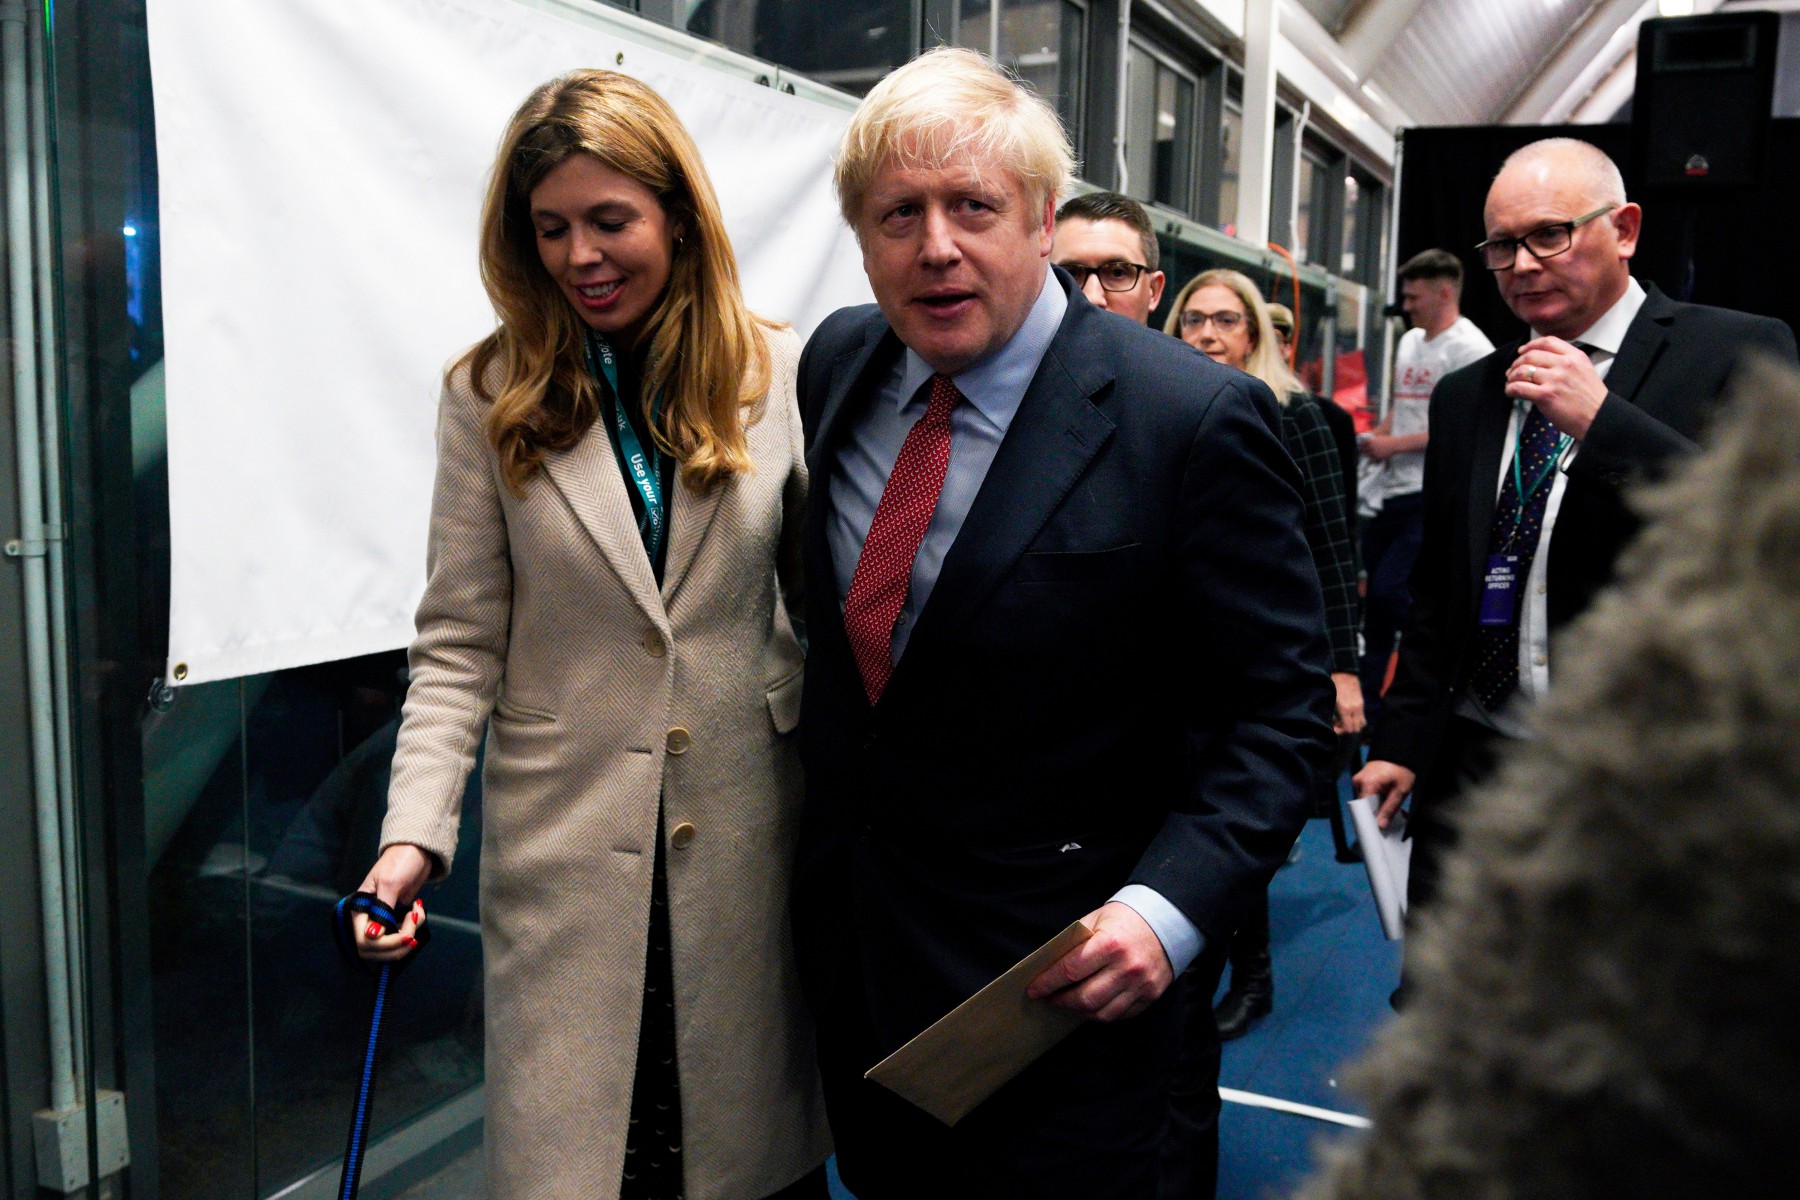 Carrie Symonds has been by the side of Boris Johnson throughout the election campaign